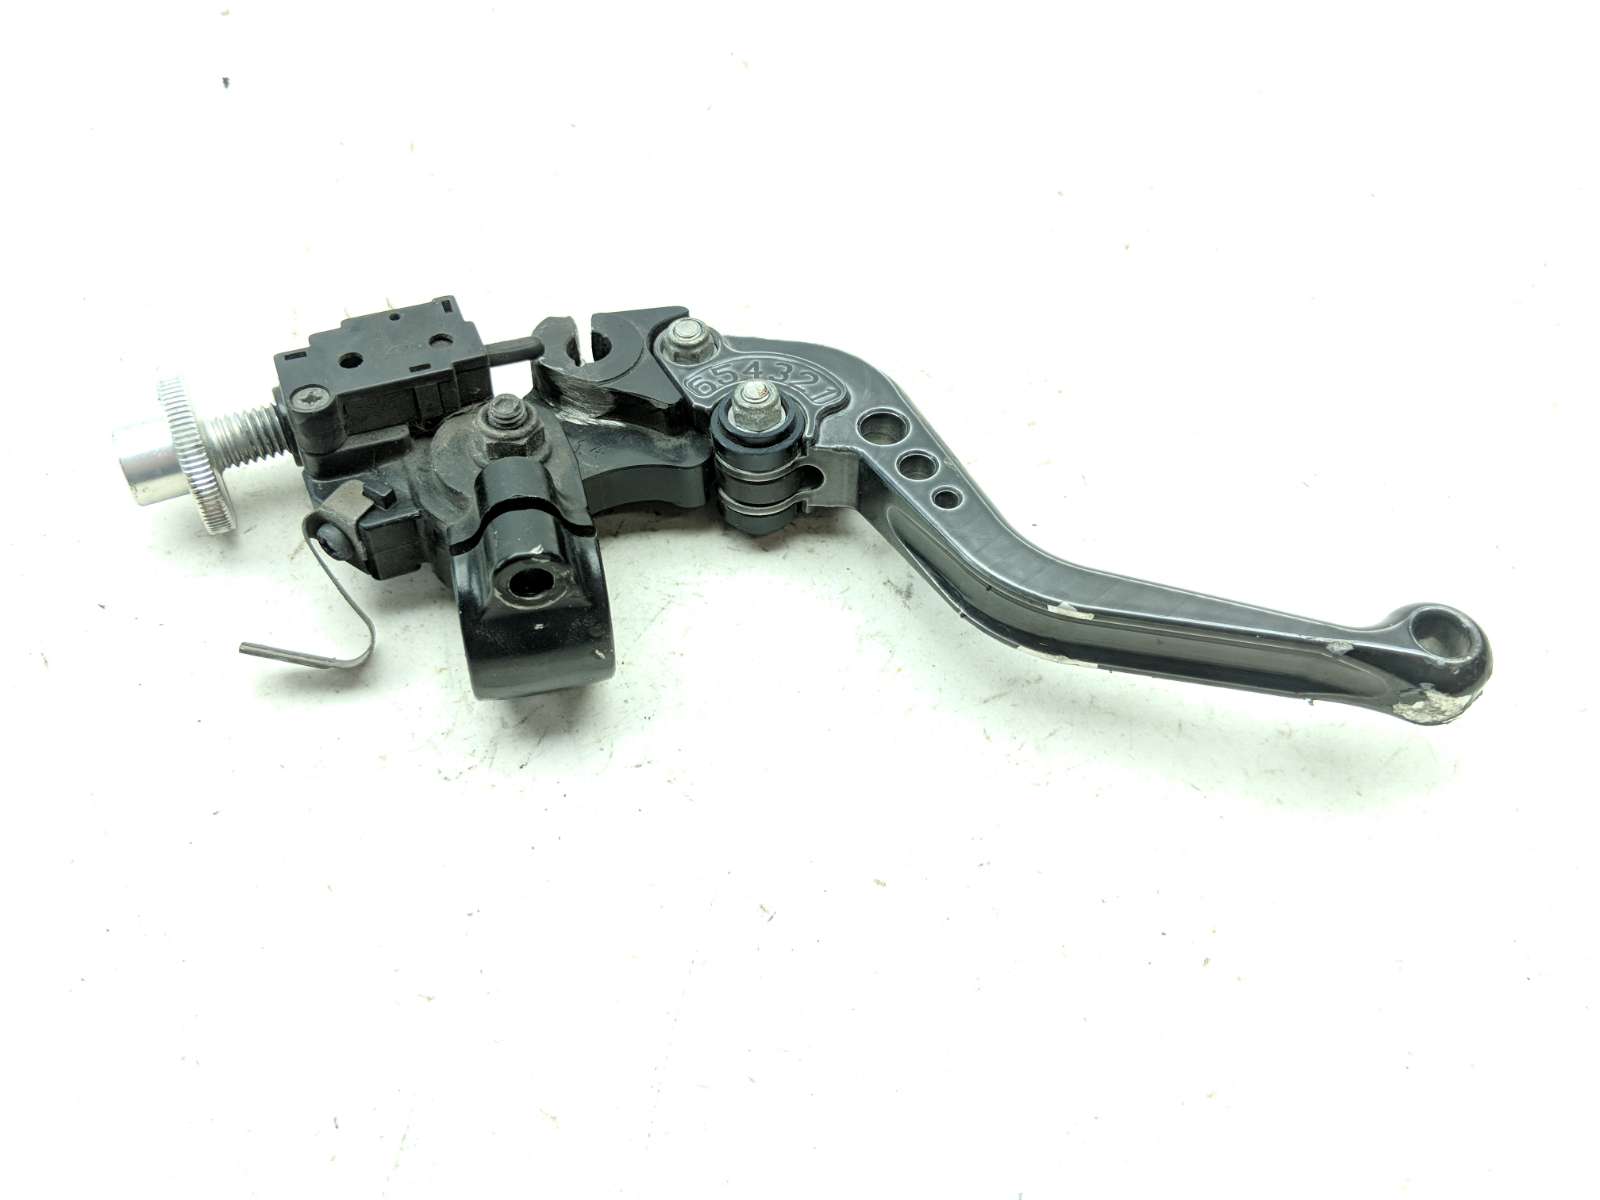 06 Yamaha YZFR6S R6 Clutch Perch Aftermarket Lever